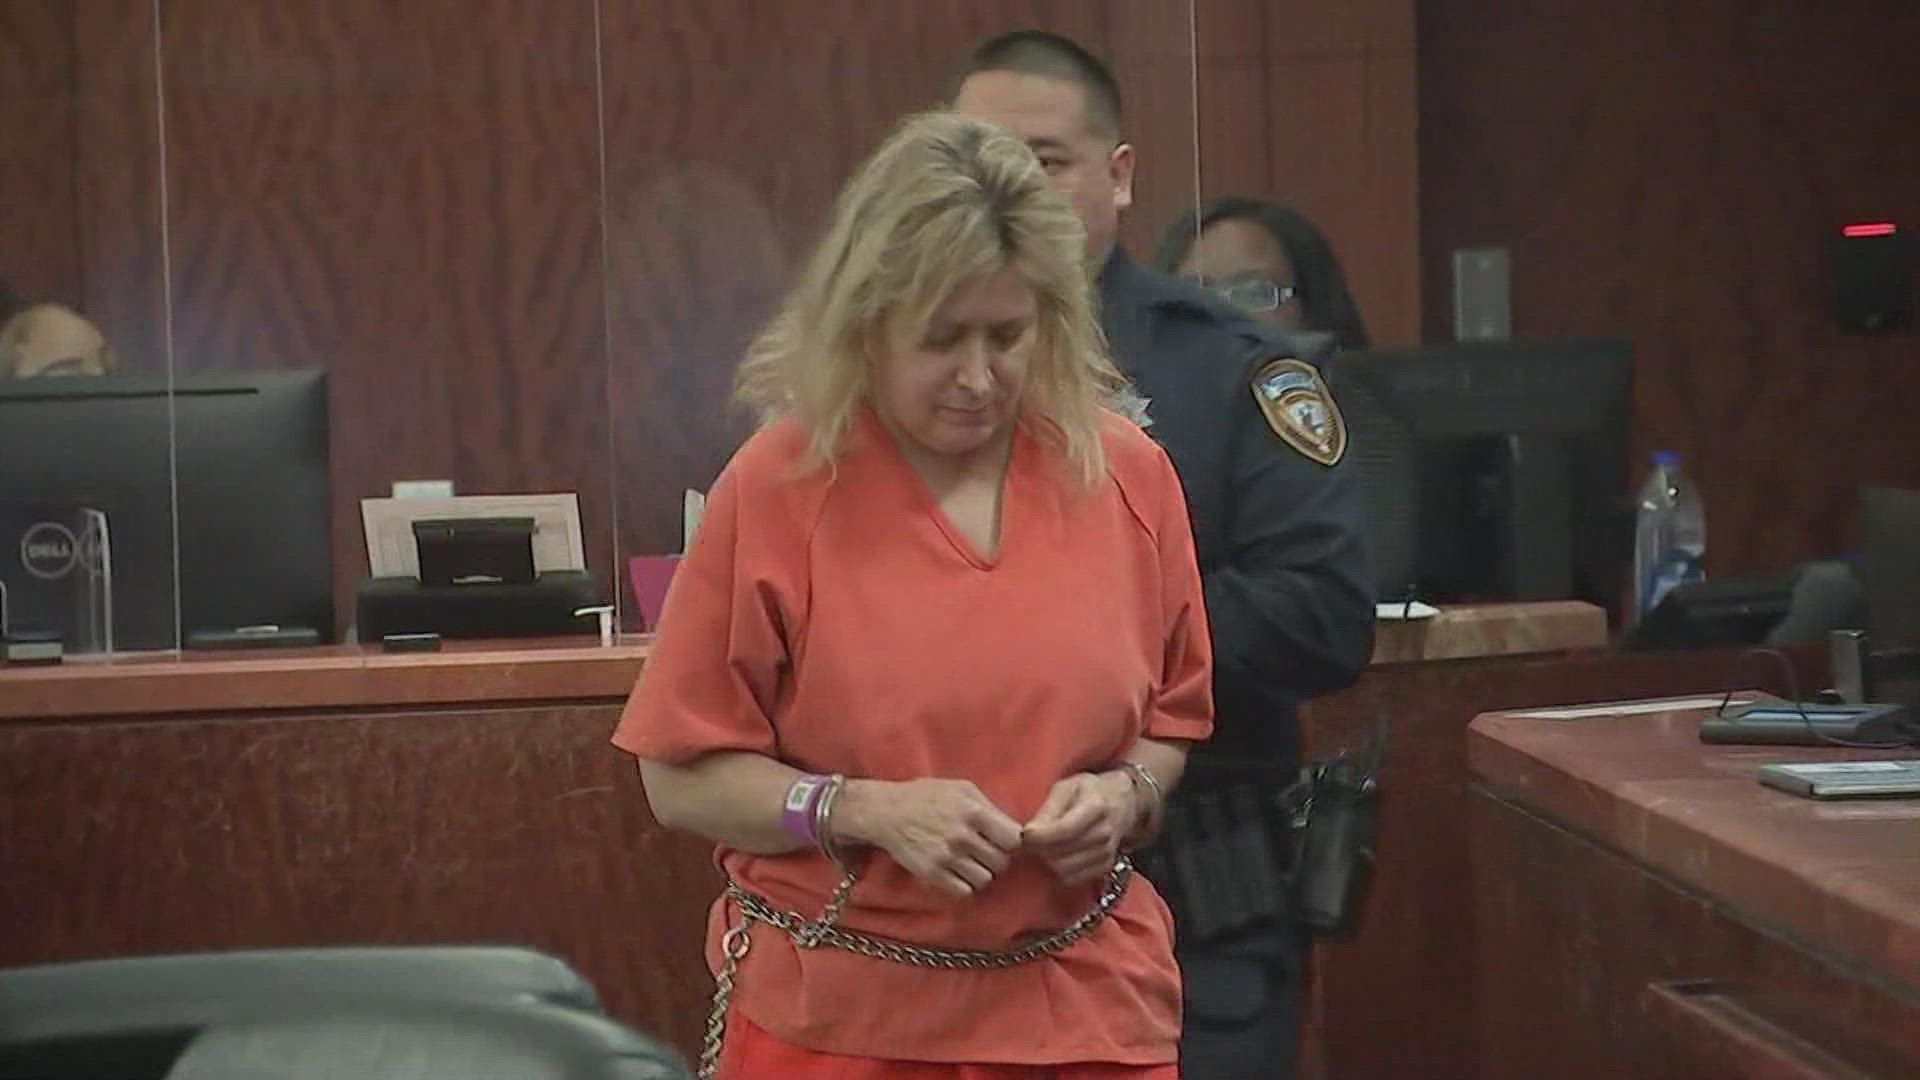 Lisa Marie Coleman made her first court appearance Monday. She's charged with kidnapping a Galleria employee and robbing at least three westside businesses.